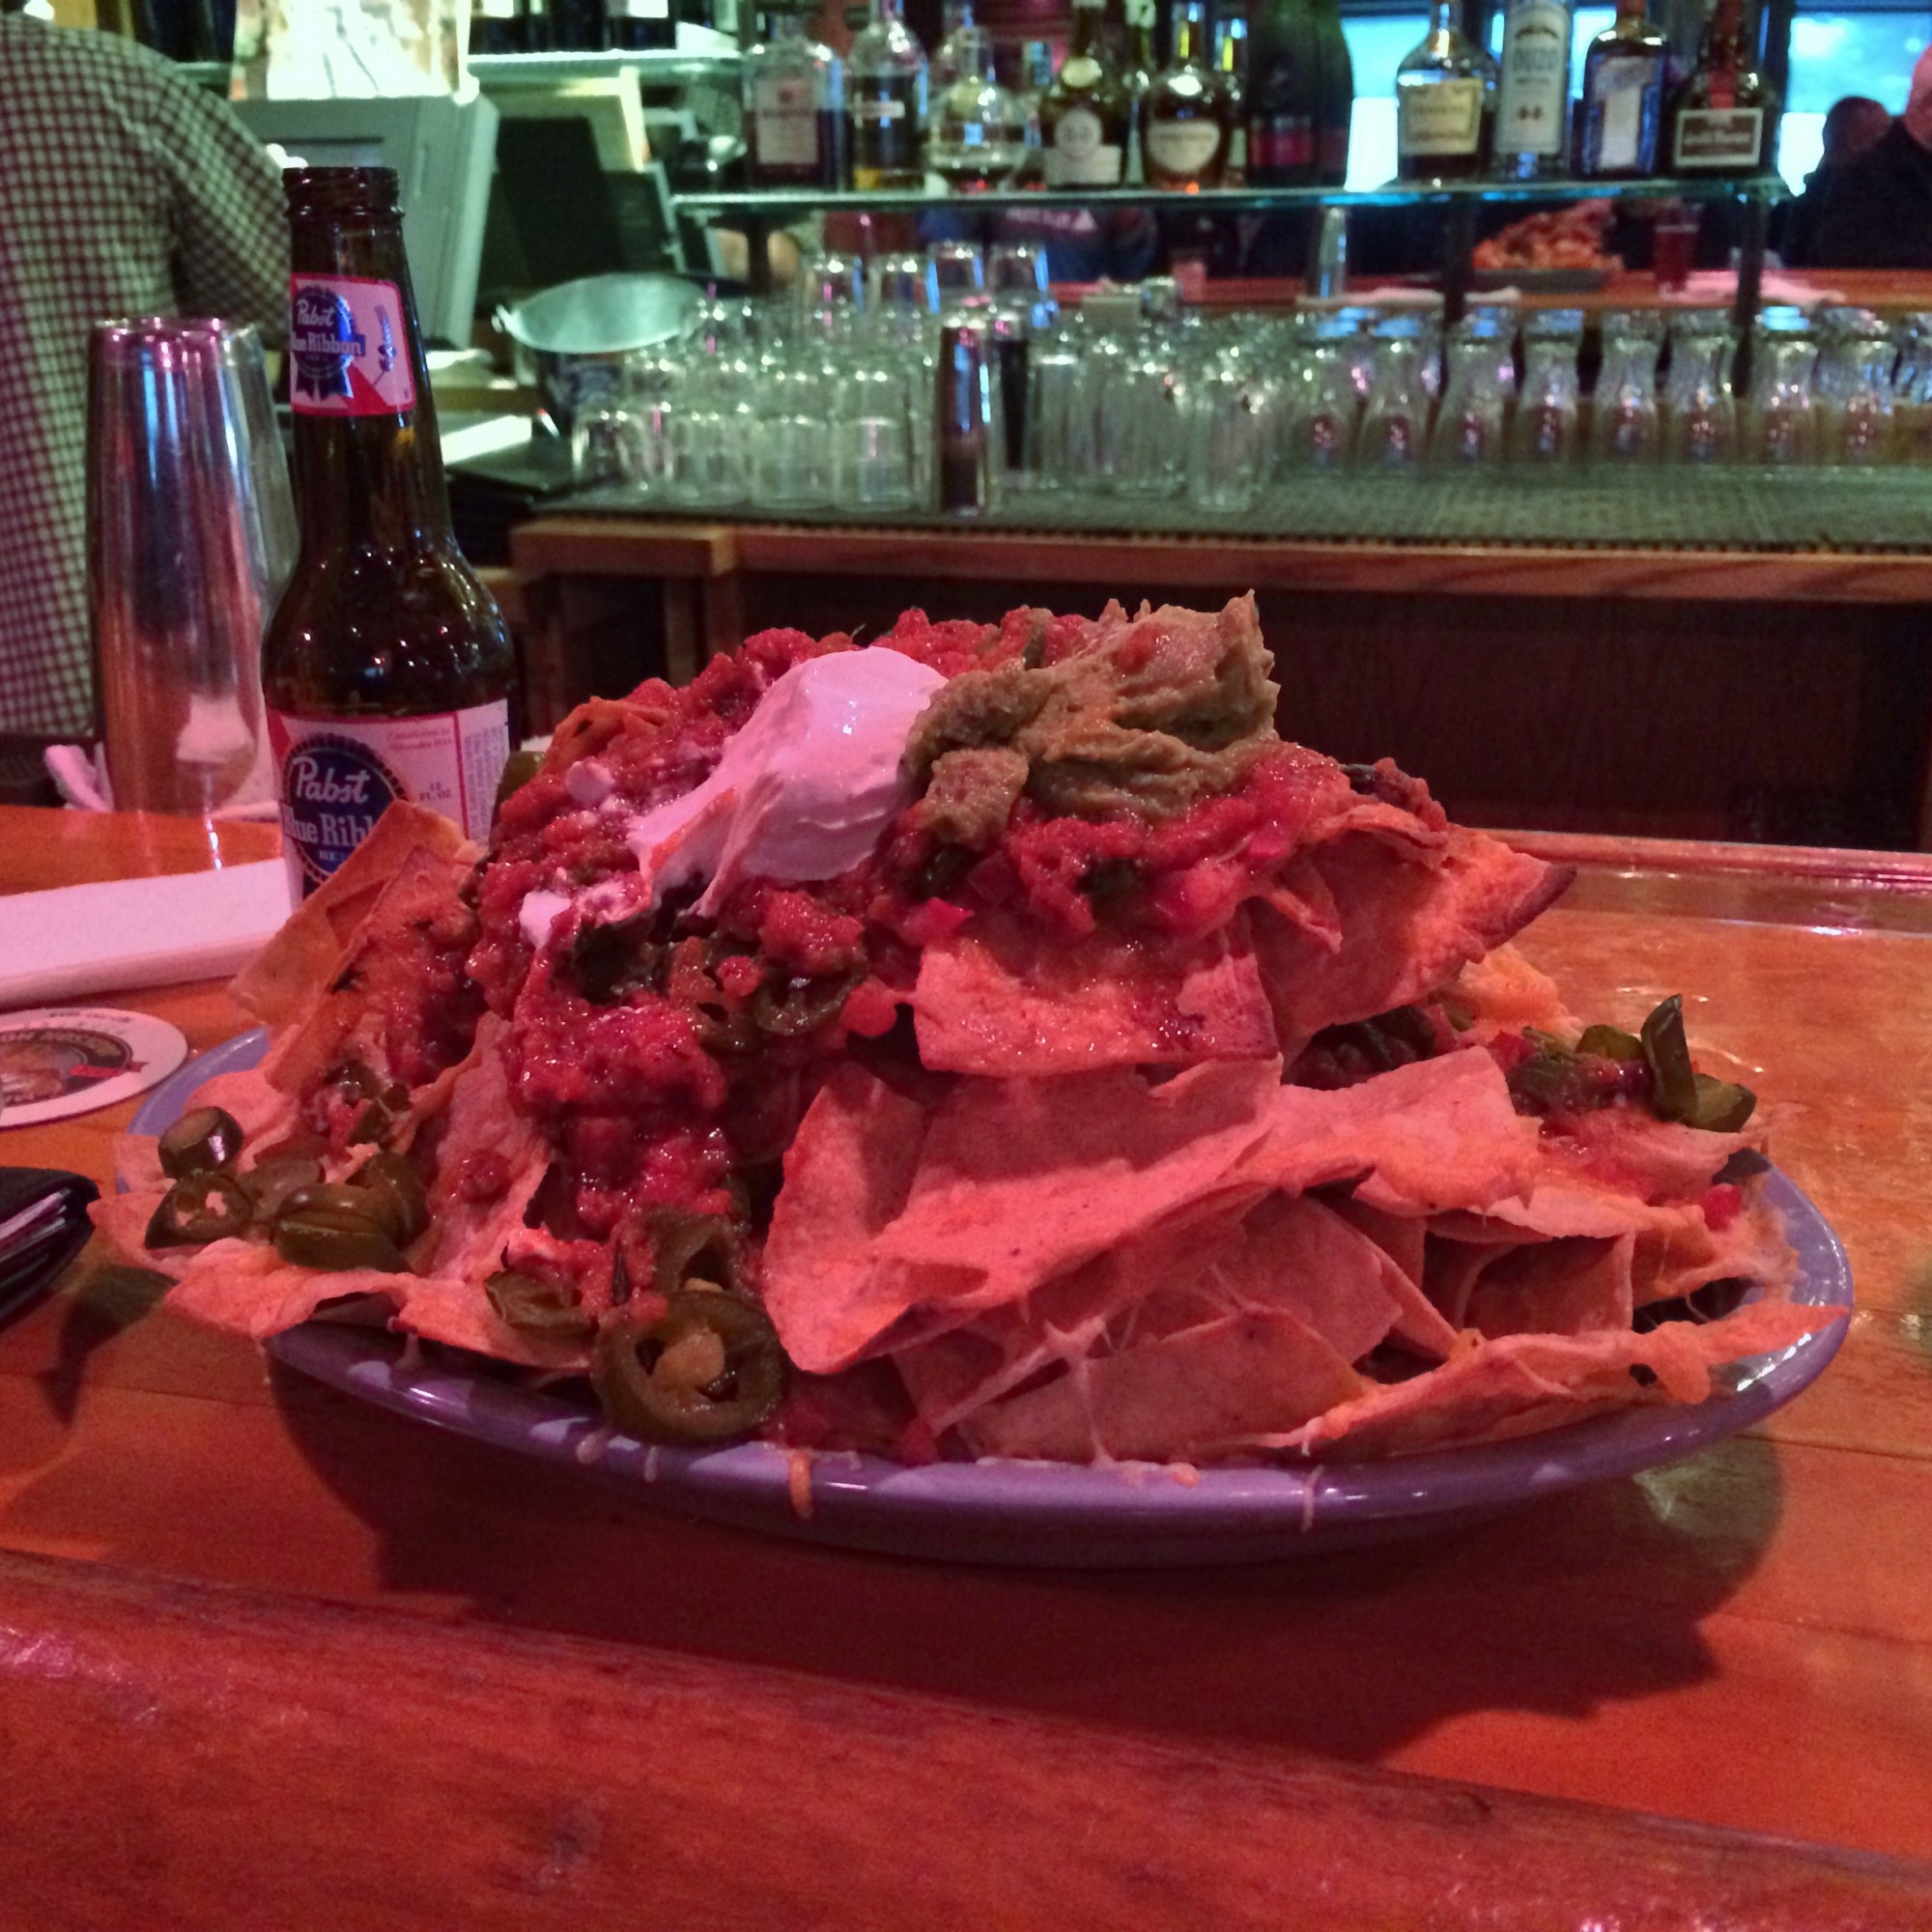 Bison chili nachos at the infamous Mangy Moose saloon. 